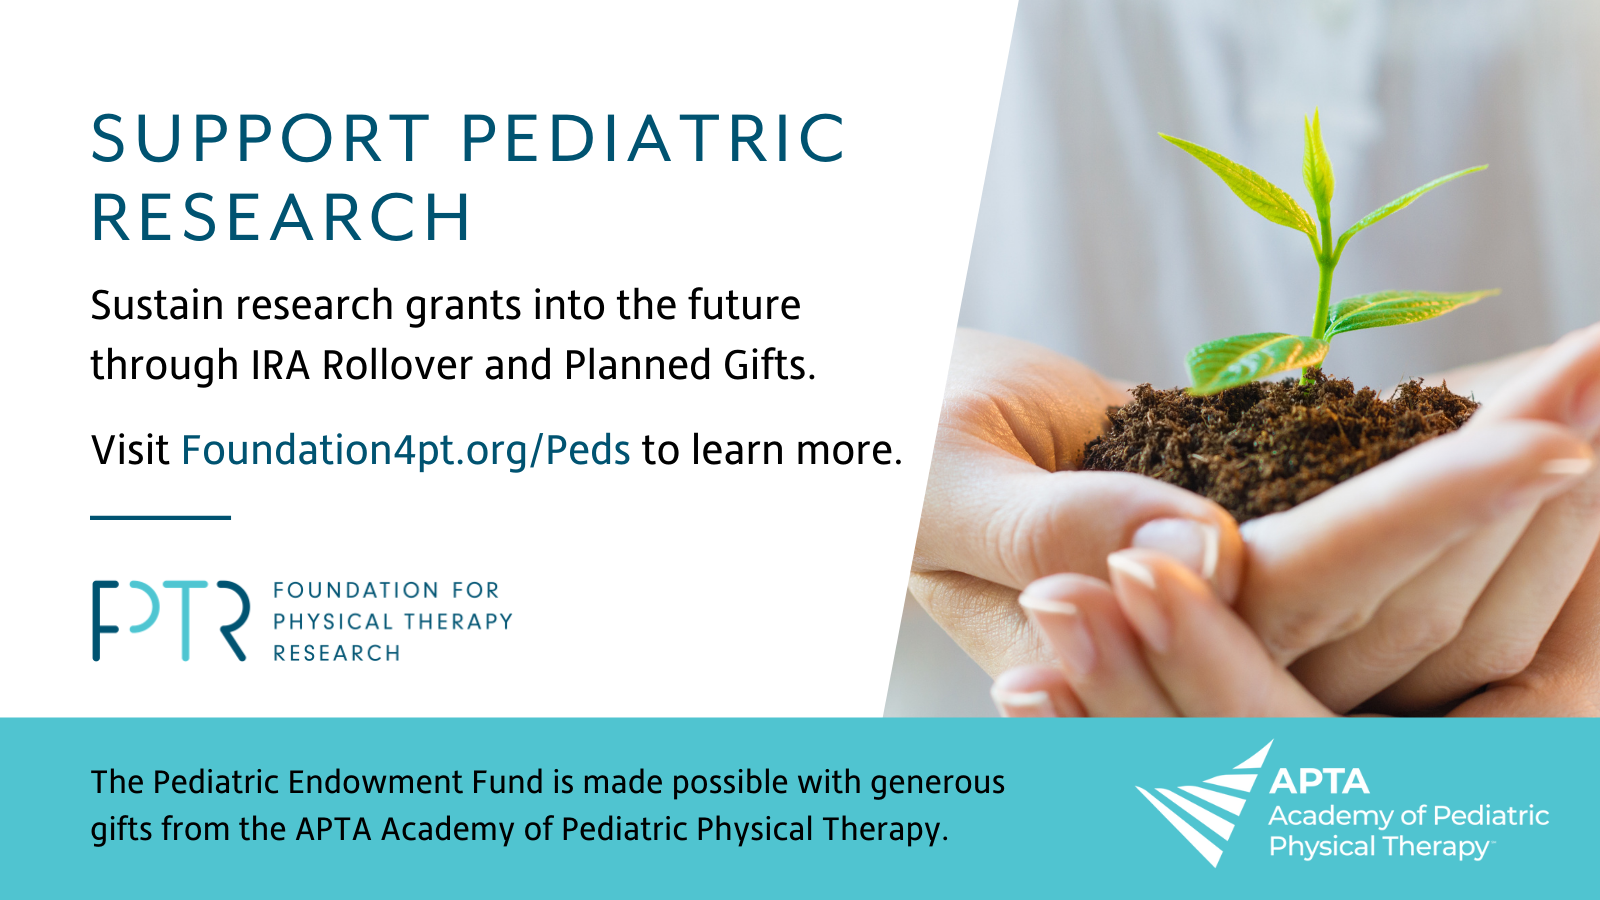 Support the Mission of the APTA Academy of Pediatric Physical Therapy